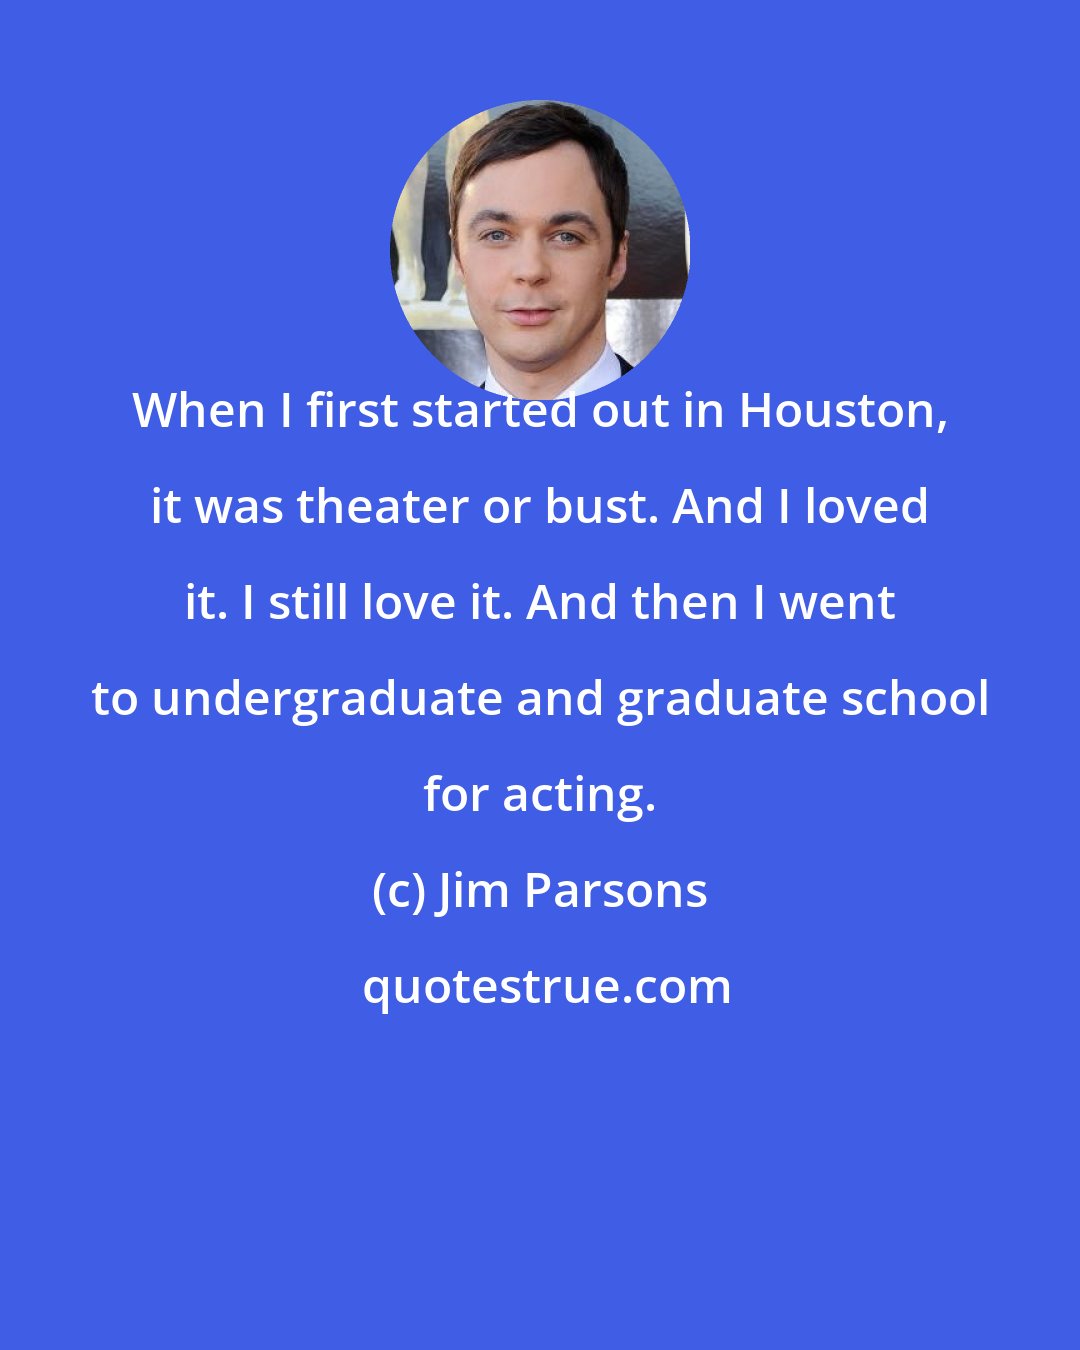 Jim Parsons: When I first started out in Houston, it was theater or bust. And I loved it. I still love it. And then I went to undergraduate and graduate school for acting.